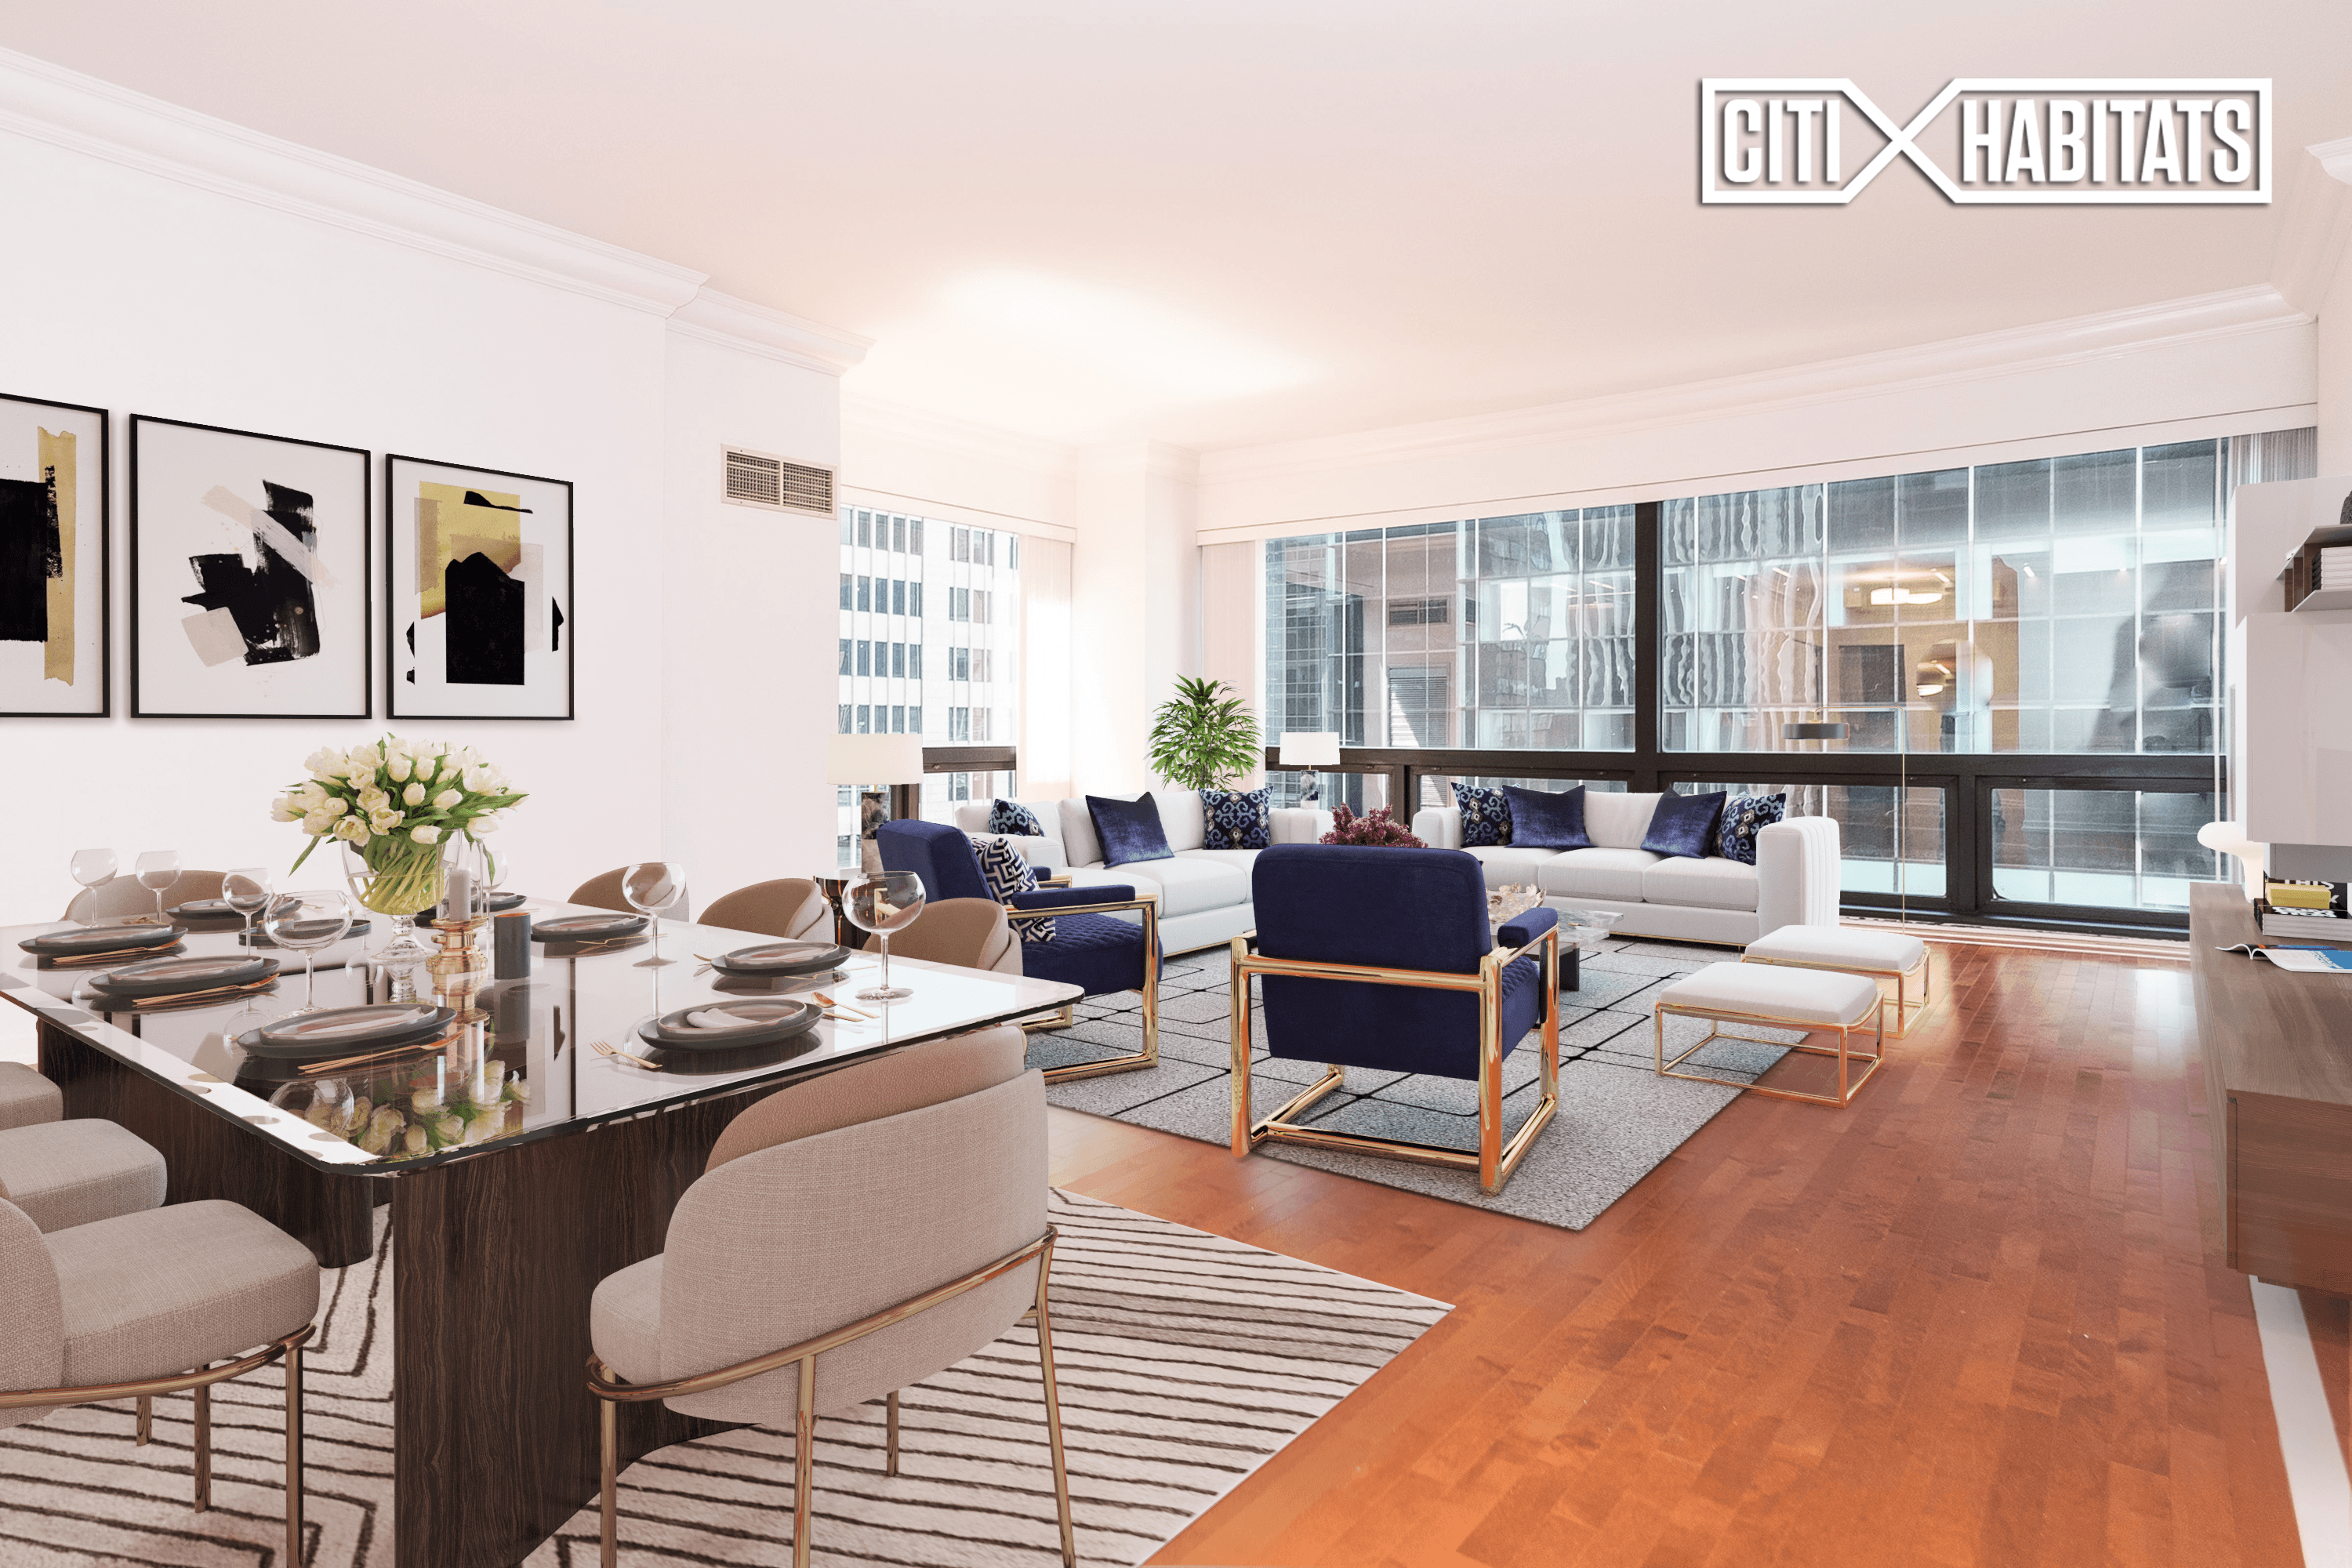 This exquisite two bedroom apartment is located at the center of all the iconic locations on Fifth Avenue in Manhattan.